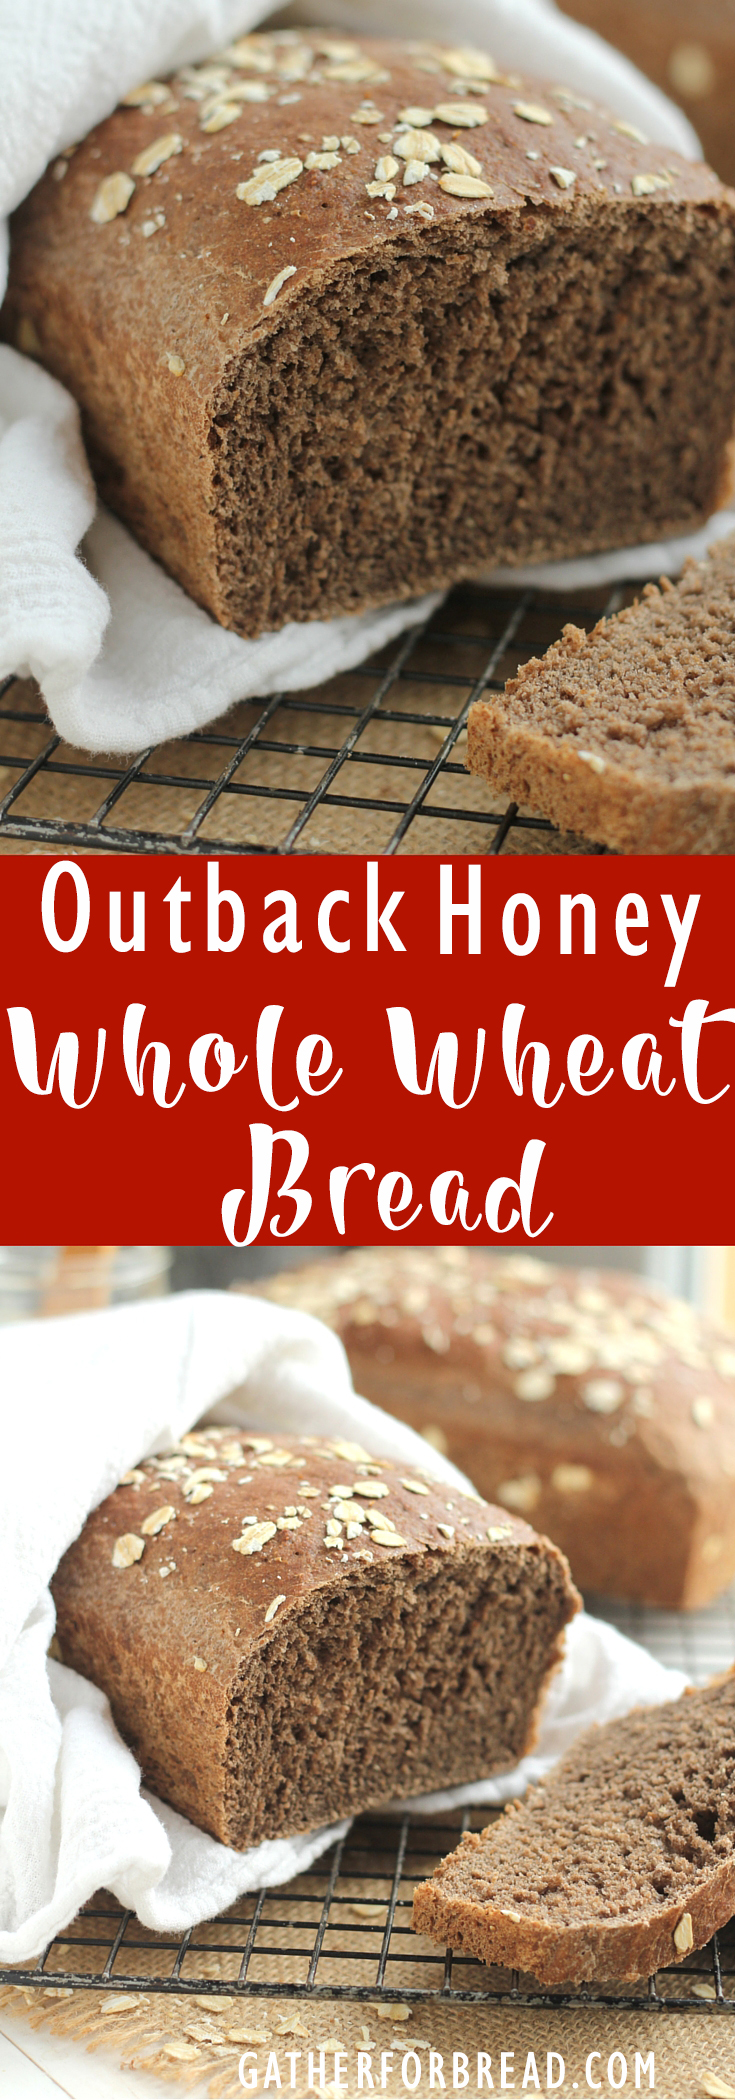 Outback Honey Whole Wheat Bread